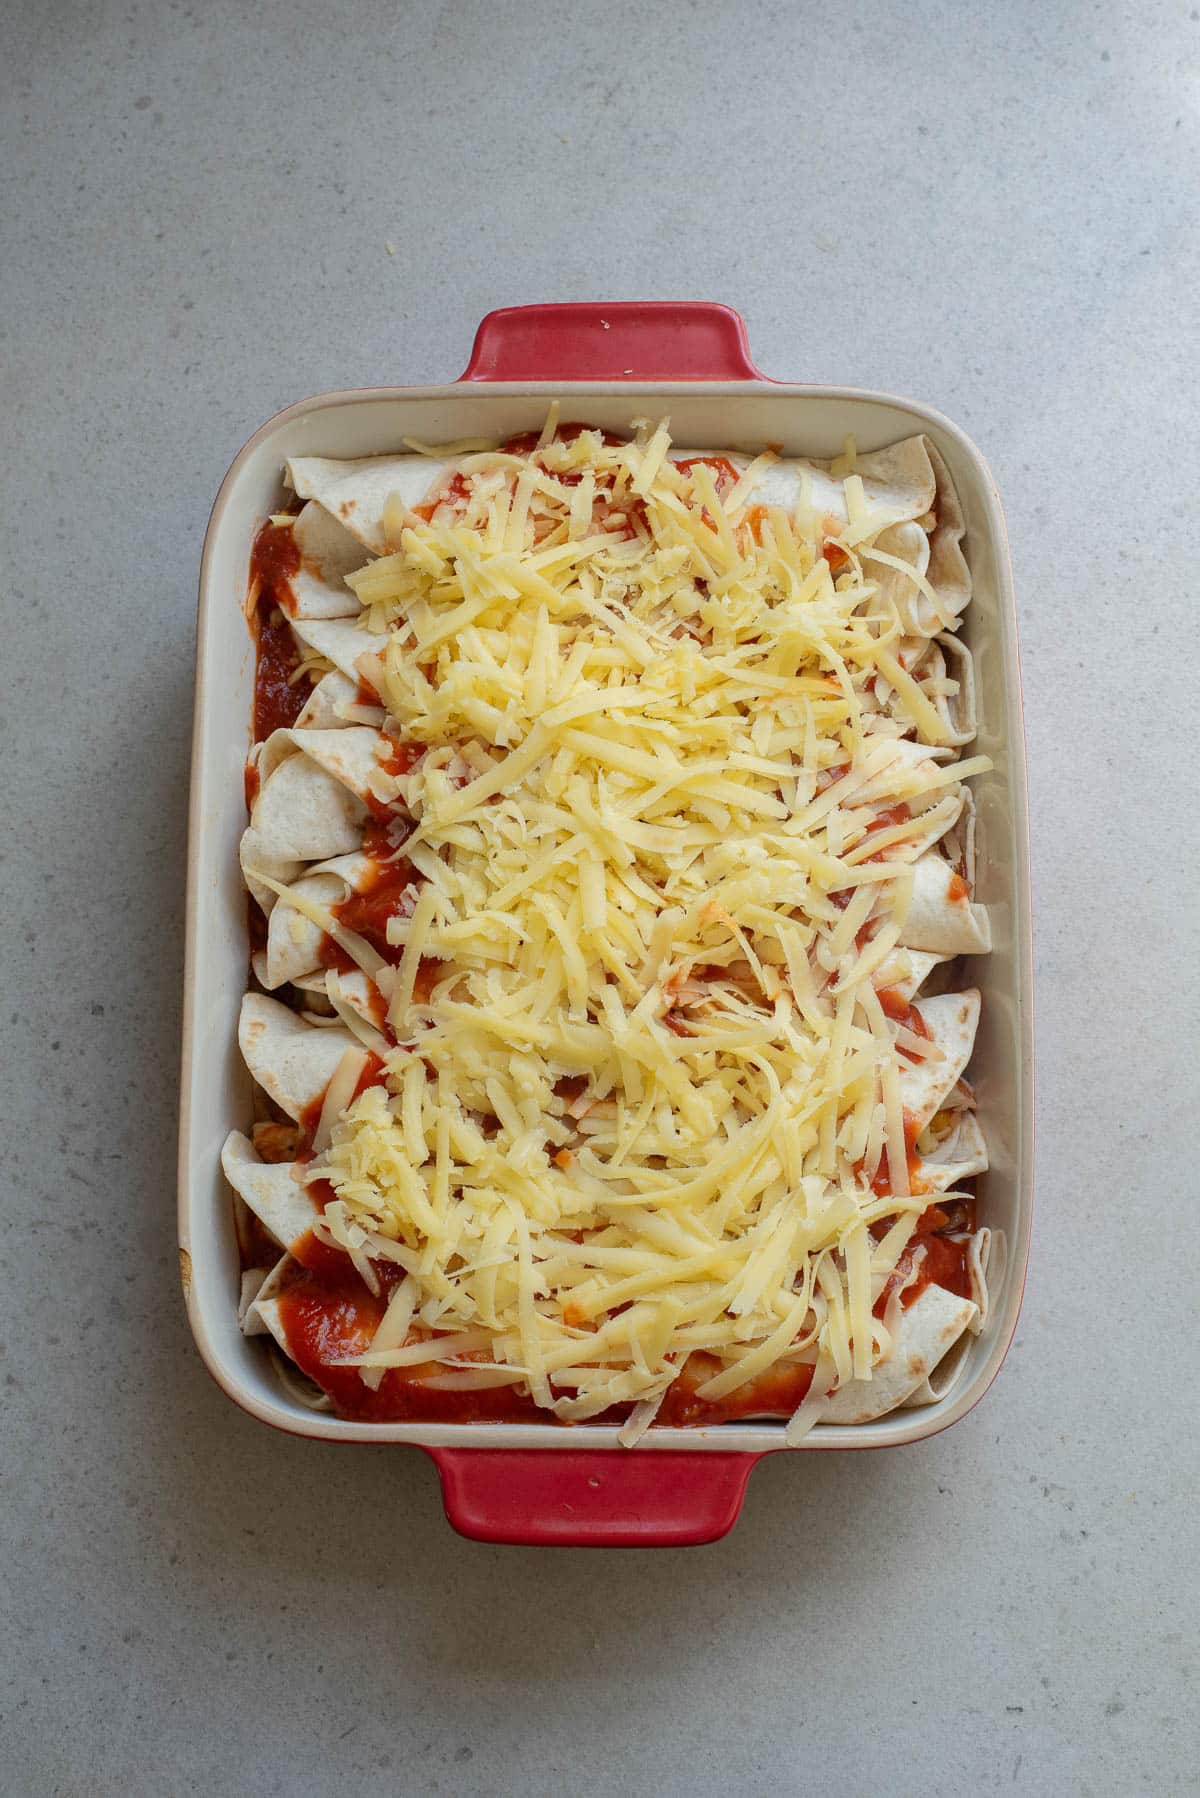 Enchiladas in a red baking dish covered with shredded cheese before baking.